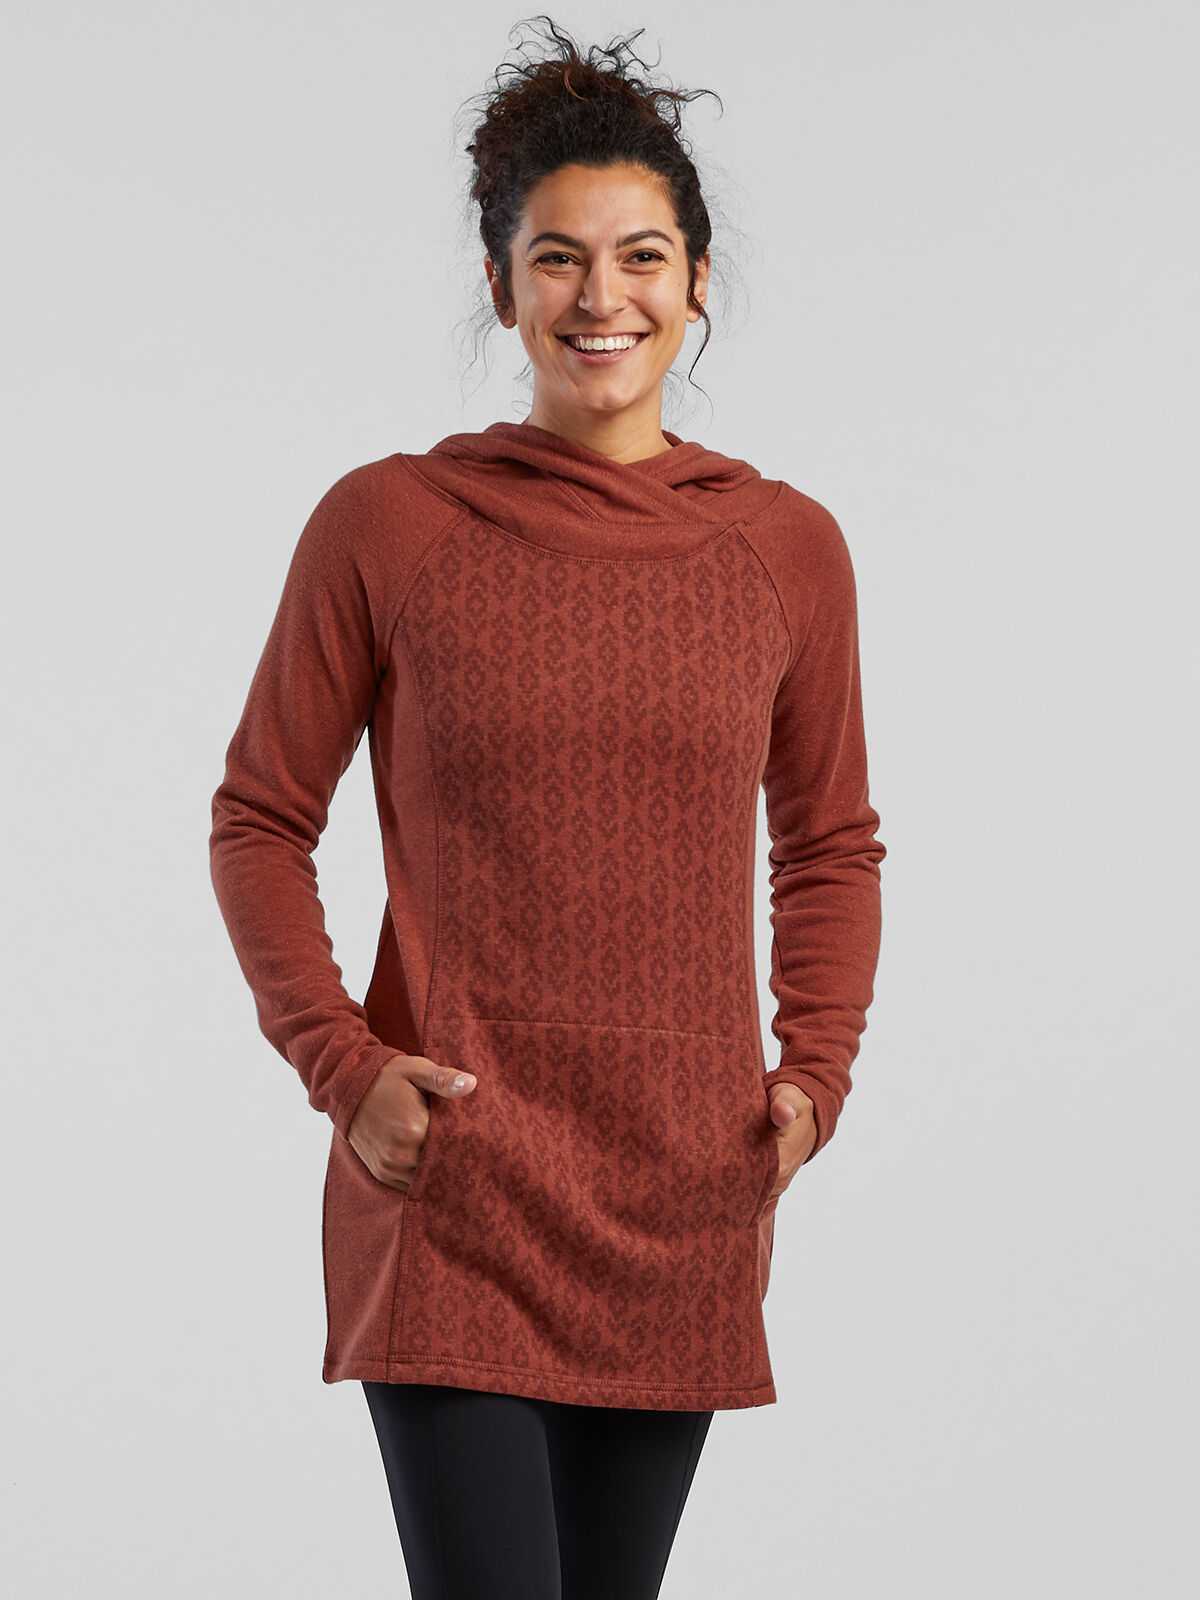 Christopher & Banks - C&B Long Sleeve Solid Knit Layering Tunic - ShopHQ